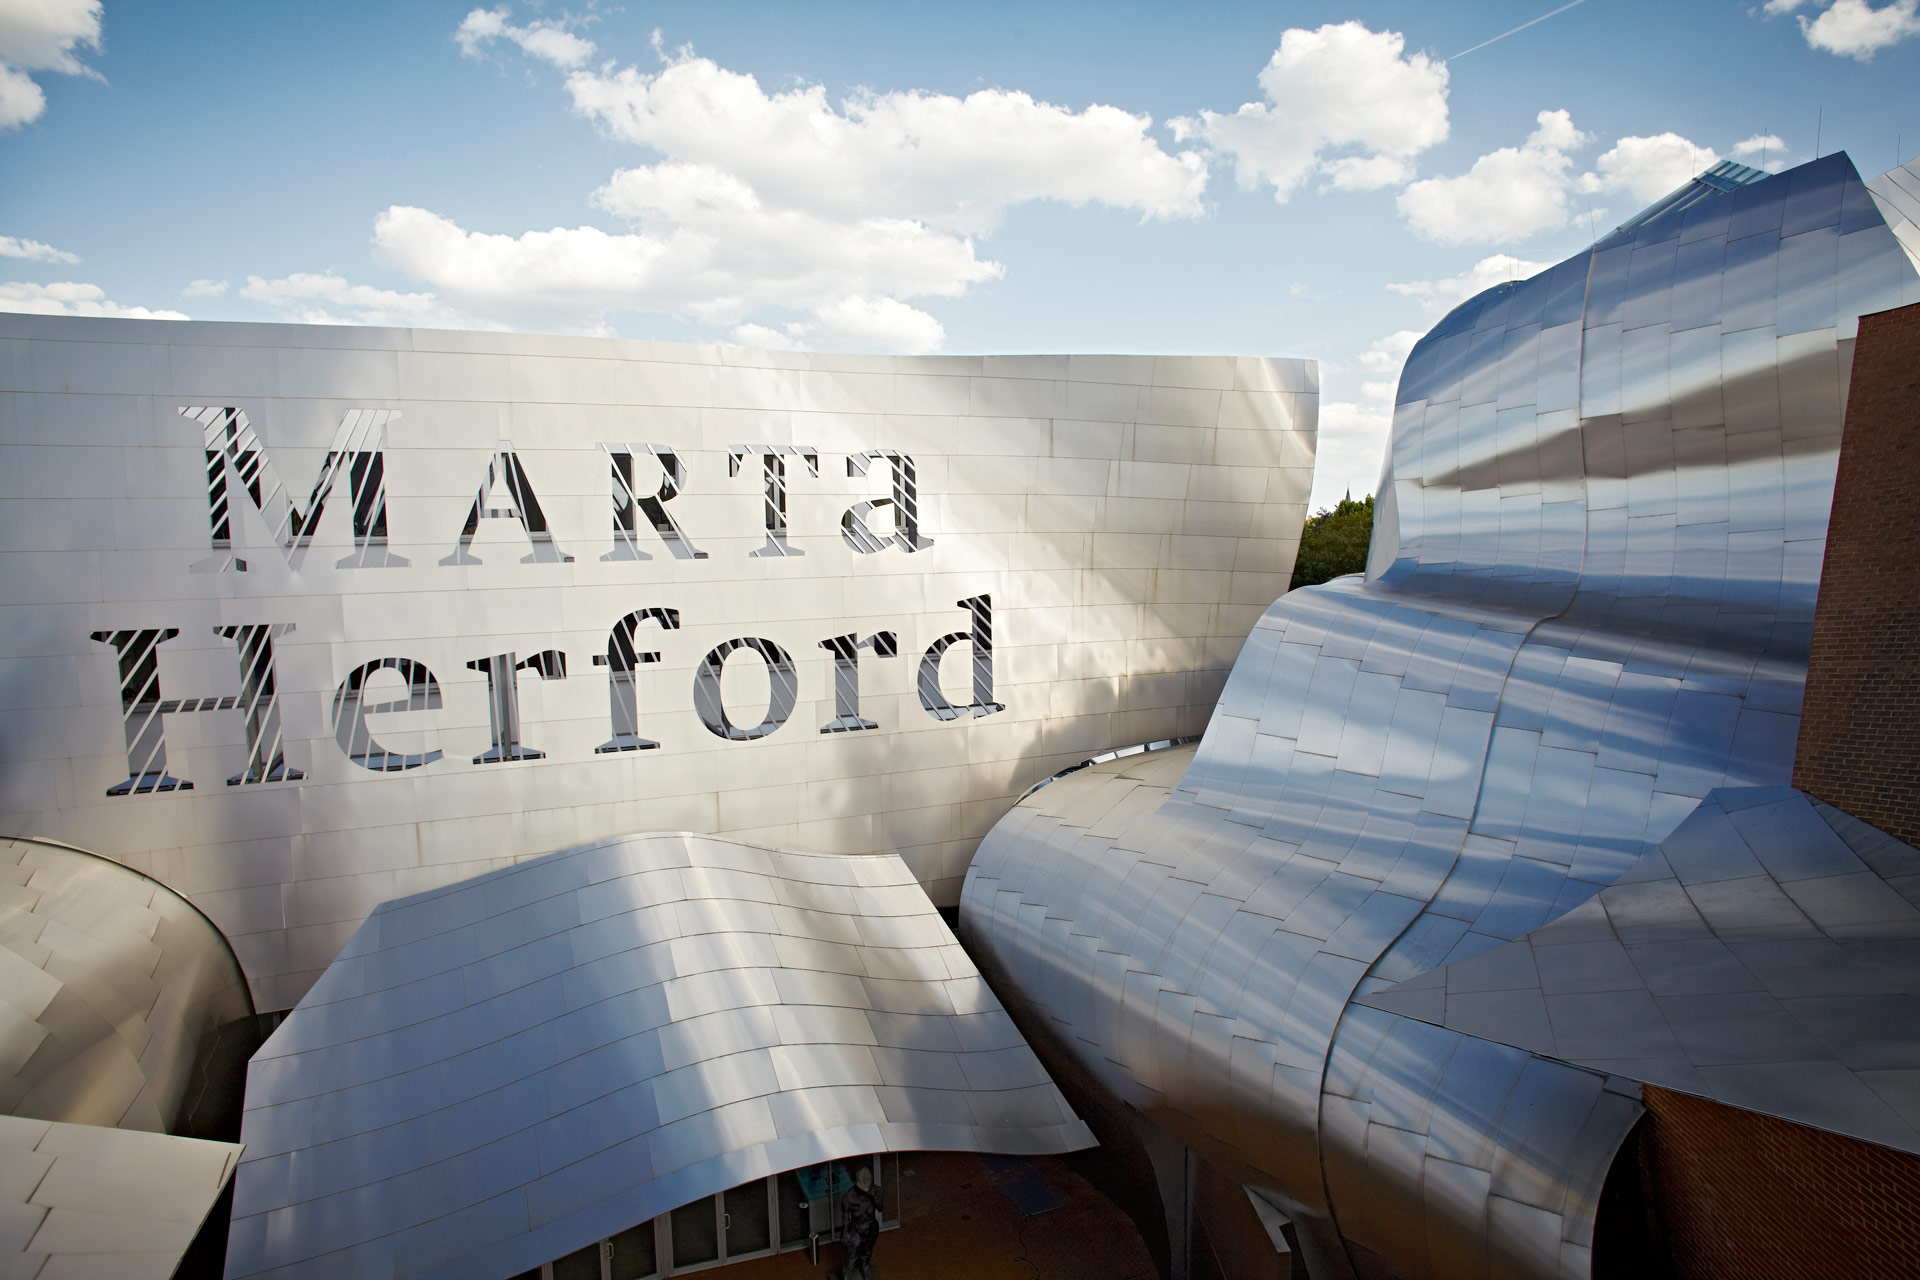 Marta-Herford-a-little-piece-of-Herford-2